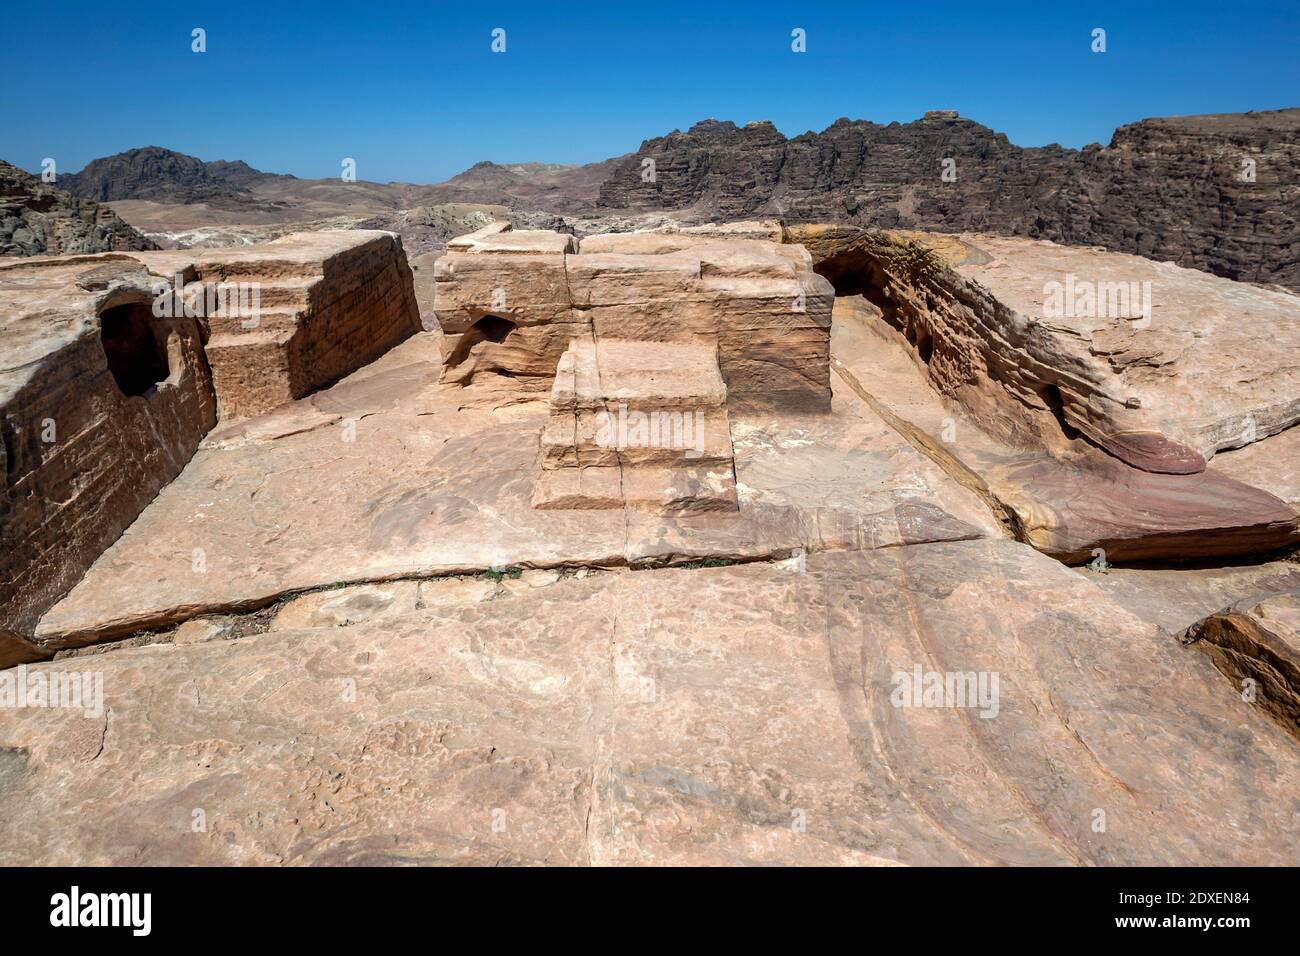 The High Place of Sacrifice (al-Madhbah in Arabic) at the ancient site of Petra in Jordan. Nabataean priests performed religious rituals here. Stock Photo